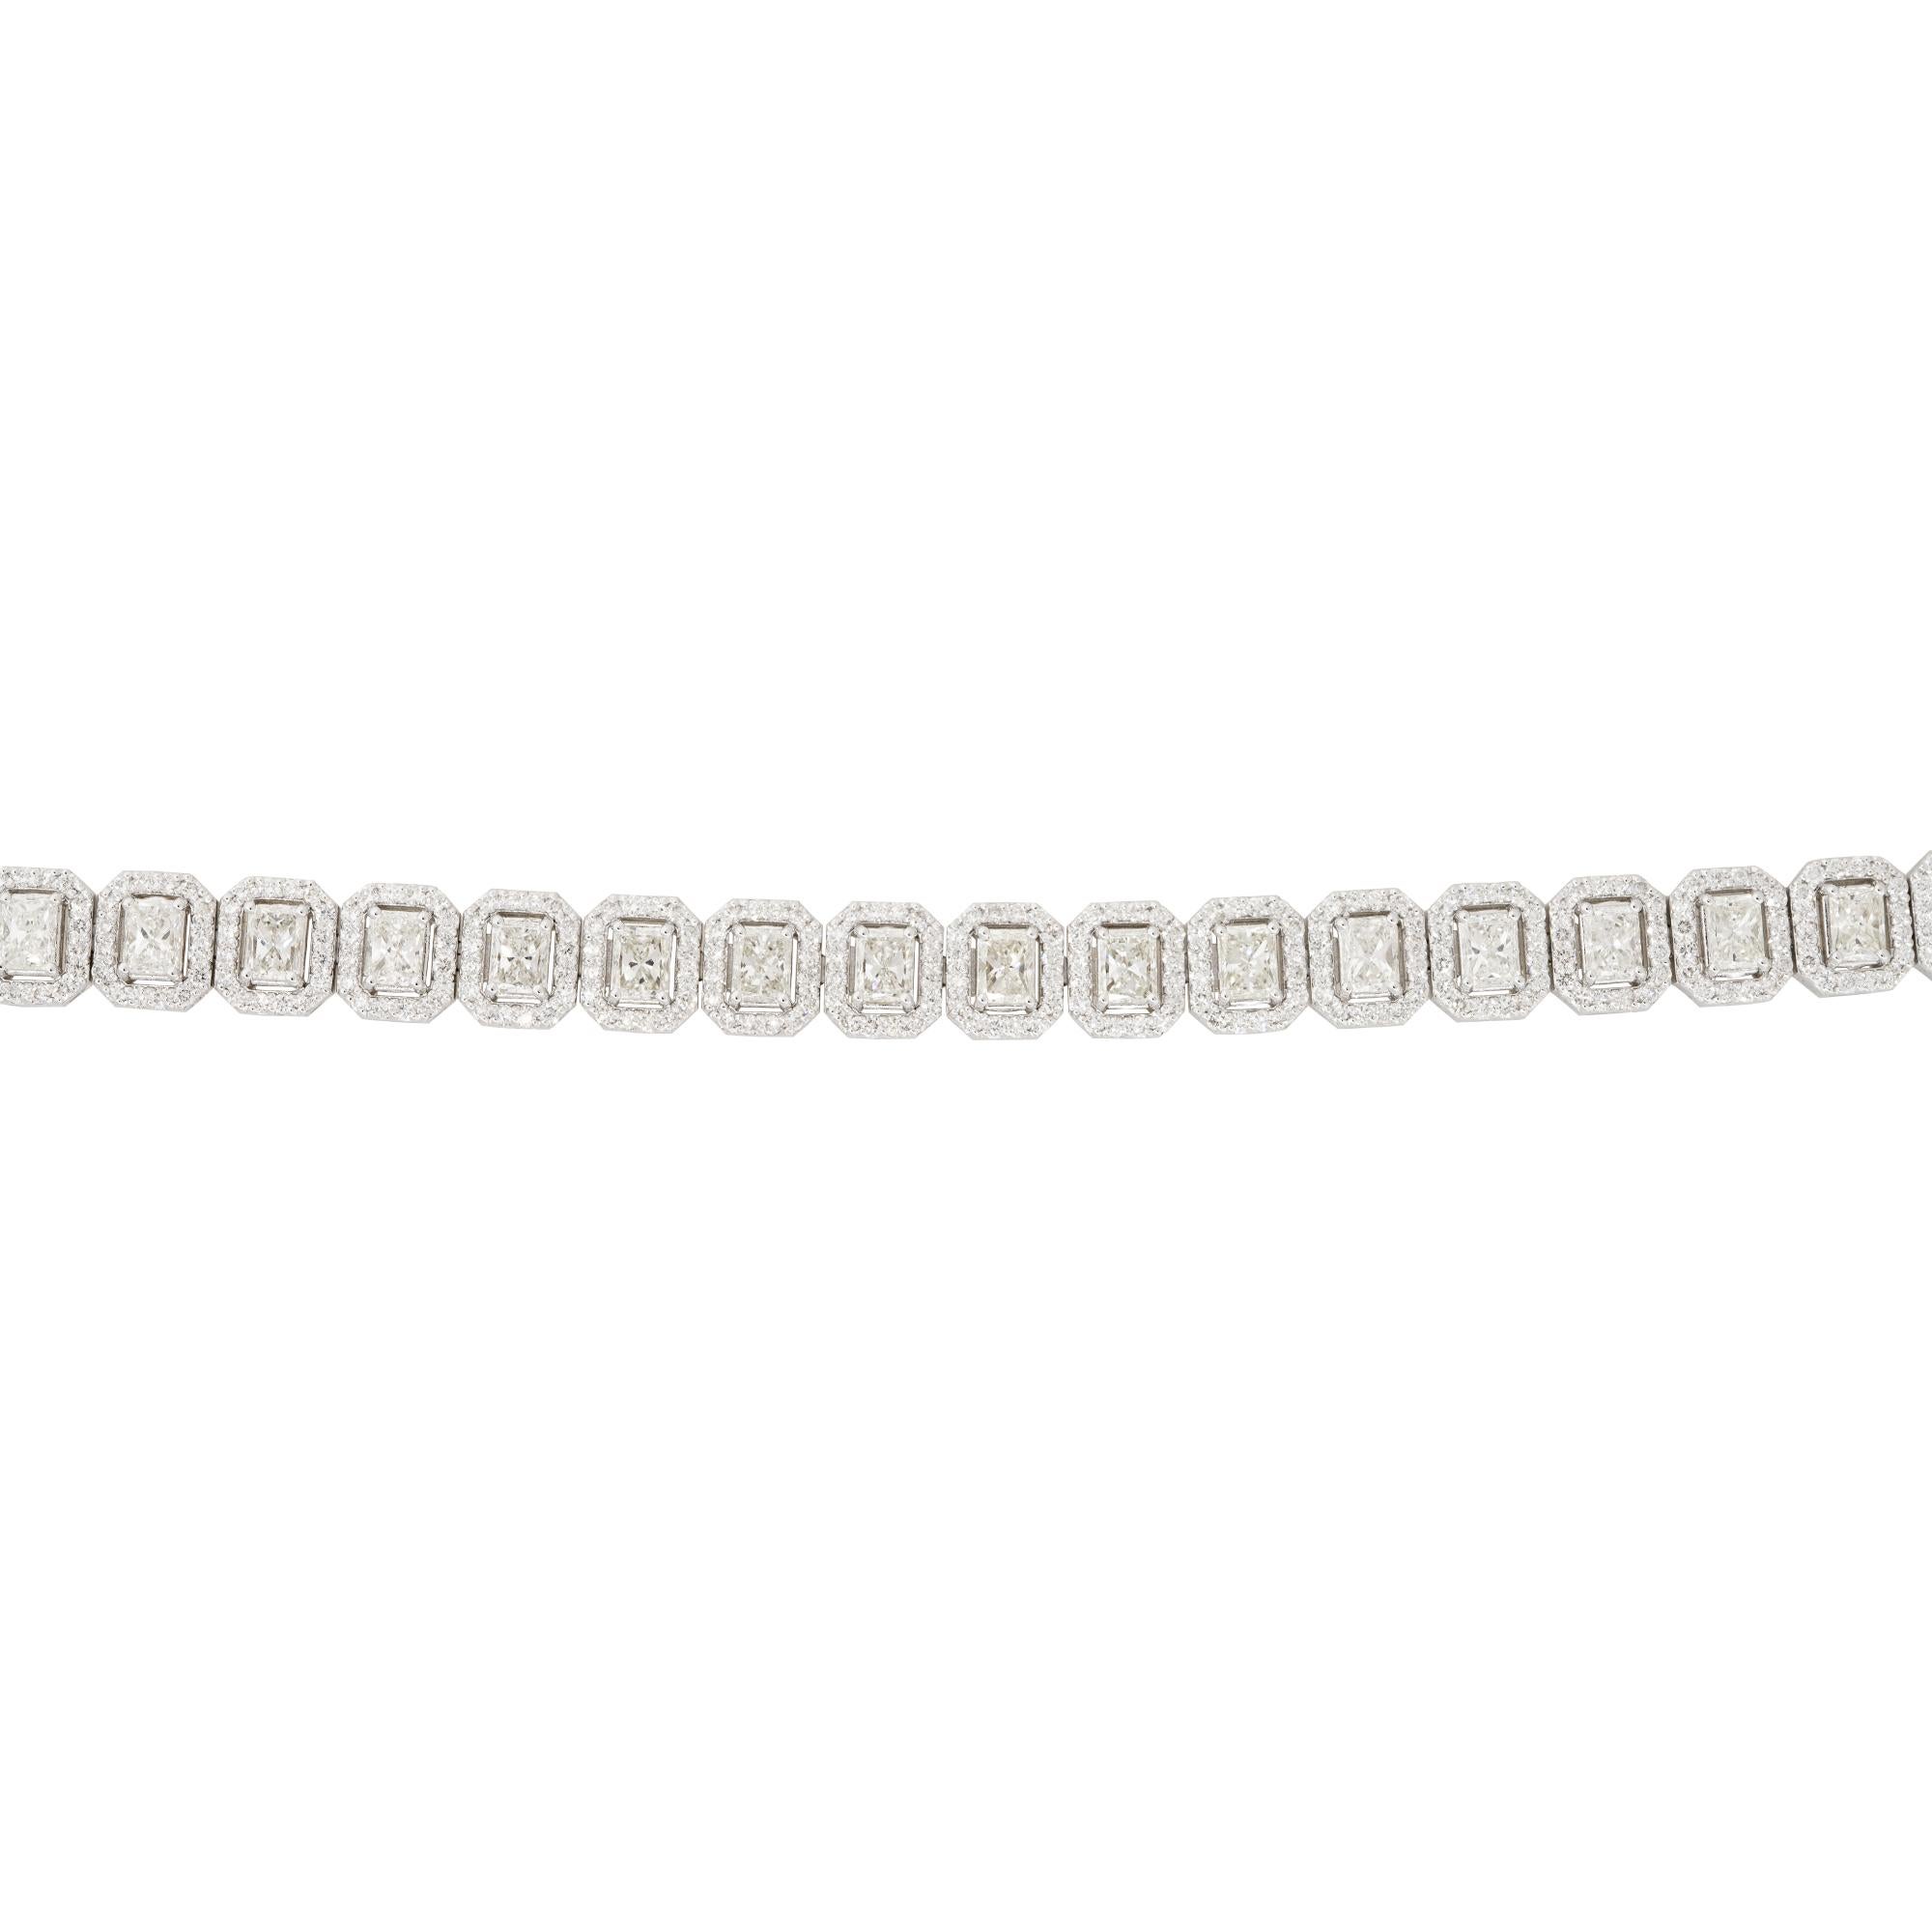 18k White Gold 11.3ctw Radiant Cut Diamond Halo Tennis Bracelet

Material: 18k White Gold
Diamond Details: Approximately 7.46ctw of Radiant Cut Diamonds and approximately 3.84ctw of Round Brilliant Diamonds set in each Halo. Diamonds are